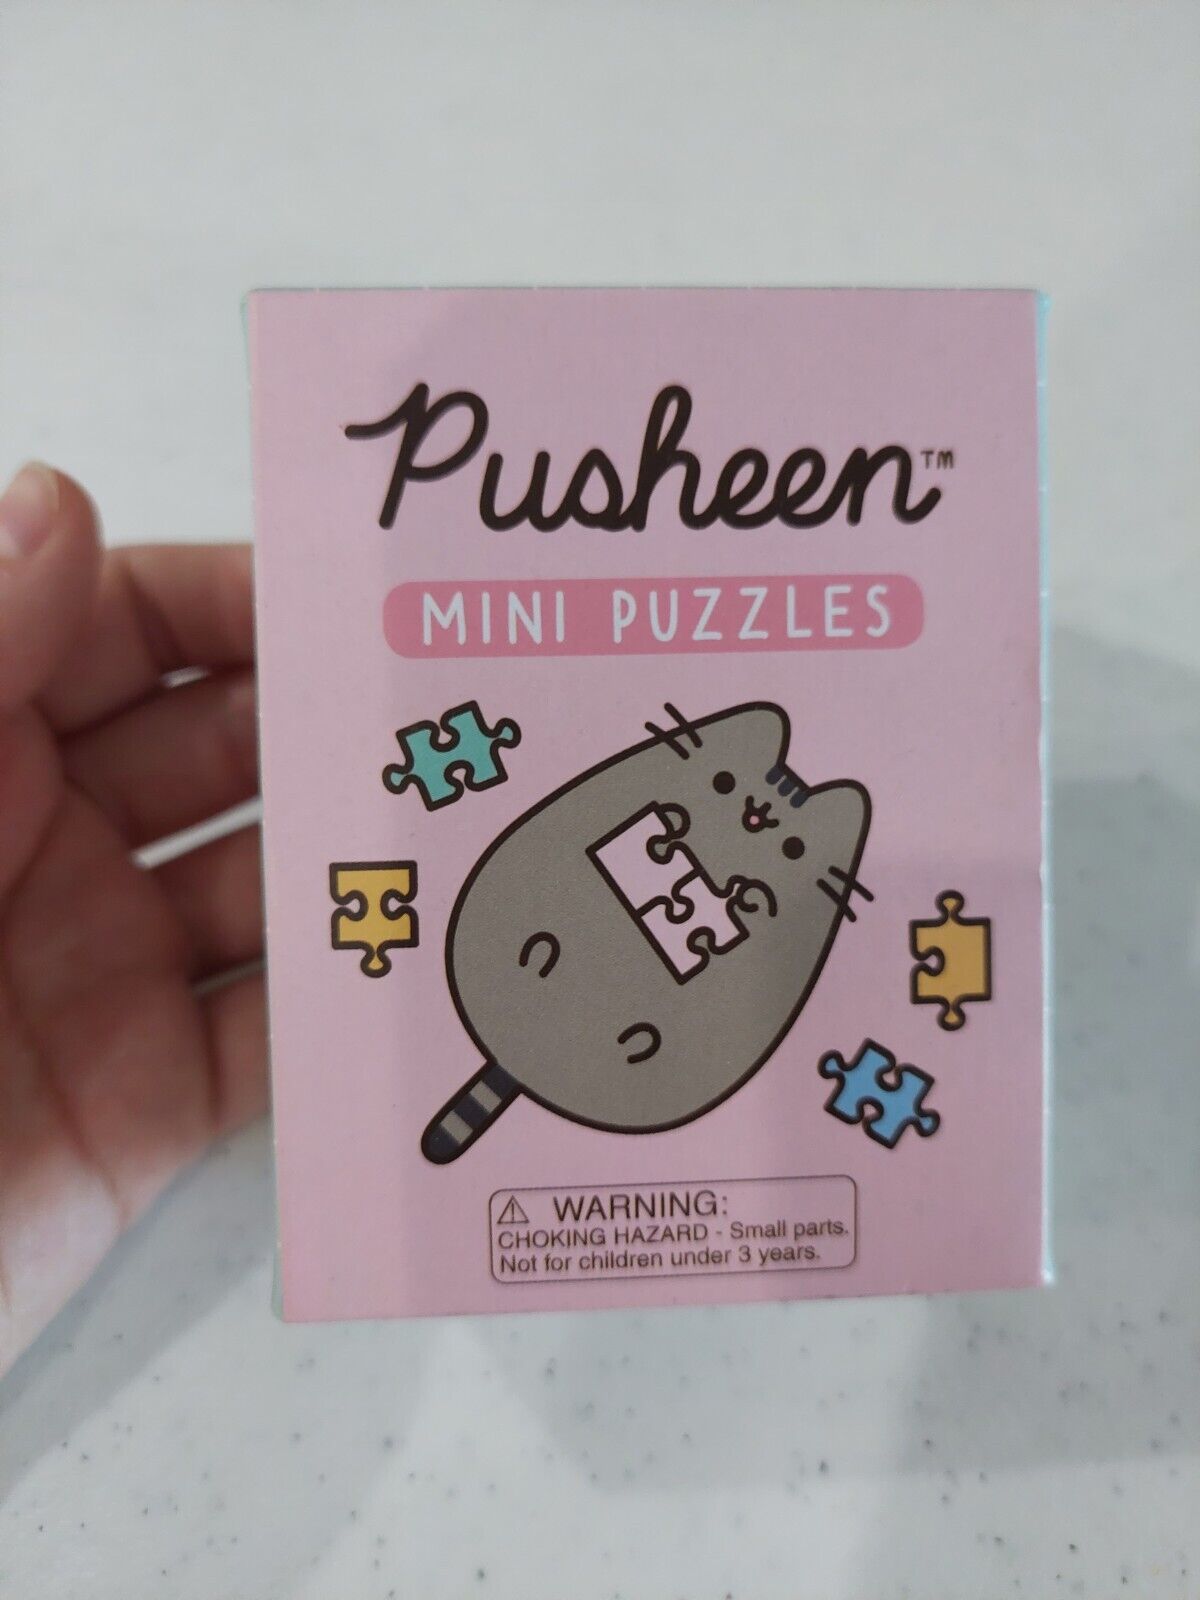 Pusheen - Mini Puzzles - Kitty Cooking Kitchen 169 Pieces Jigsaw Miniture Cats